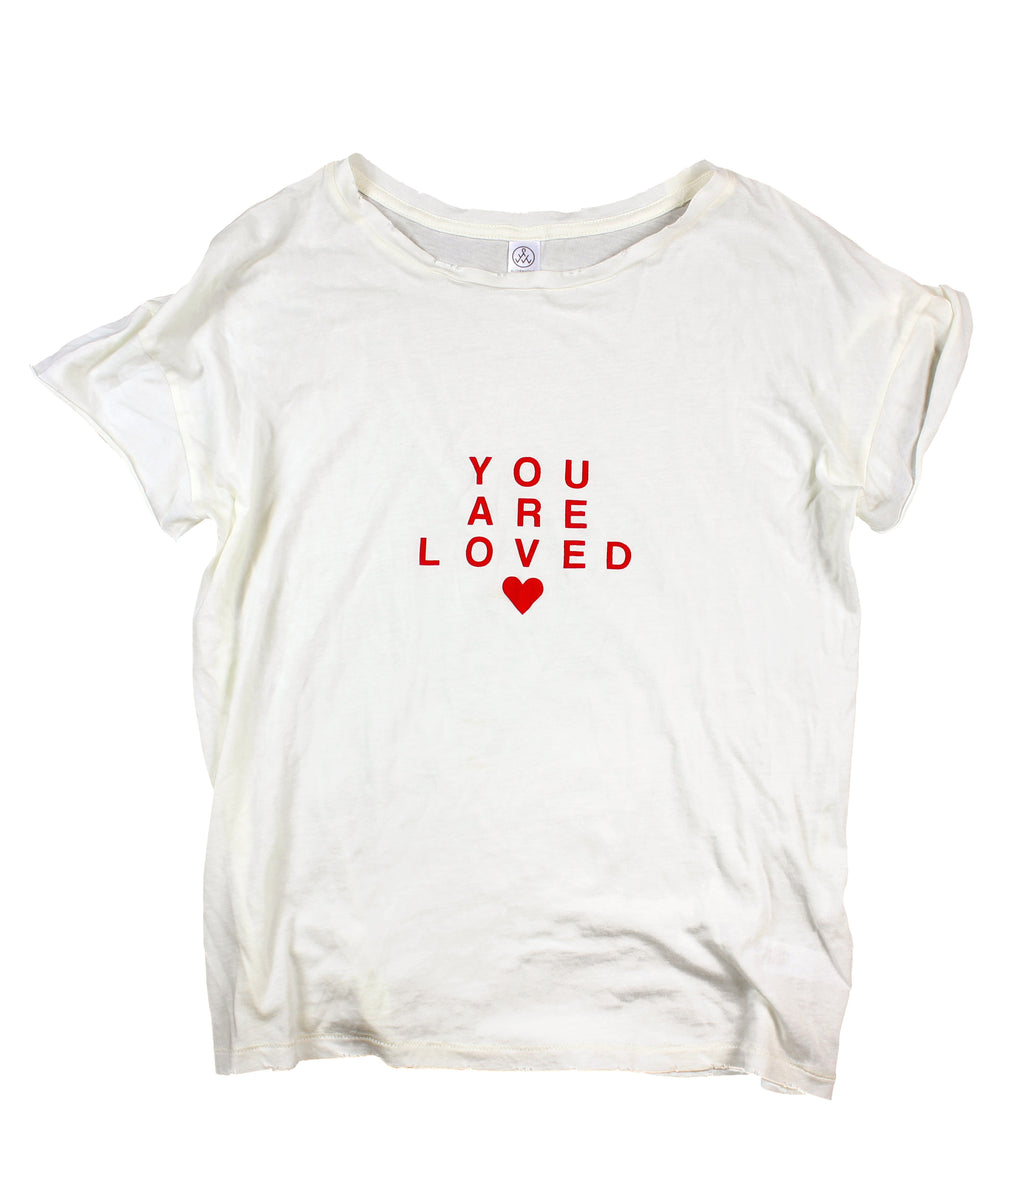 YOU ARE LOVED OFF-WHITE DISTRESSED WOMEN'S FITTED T-SHIRT